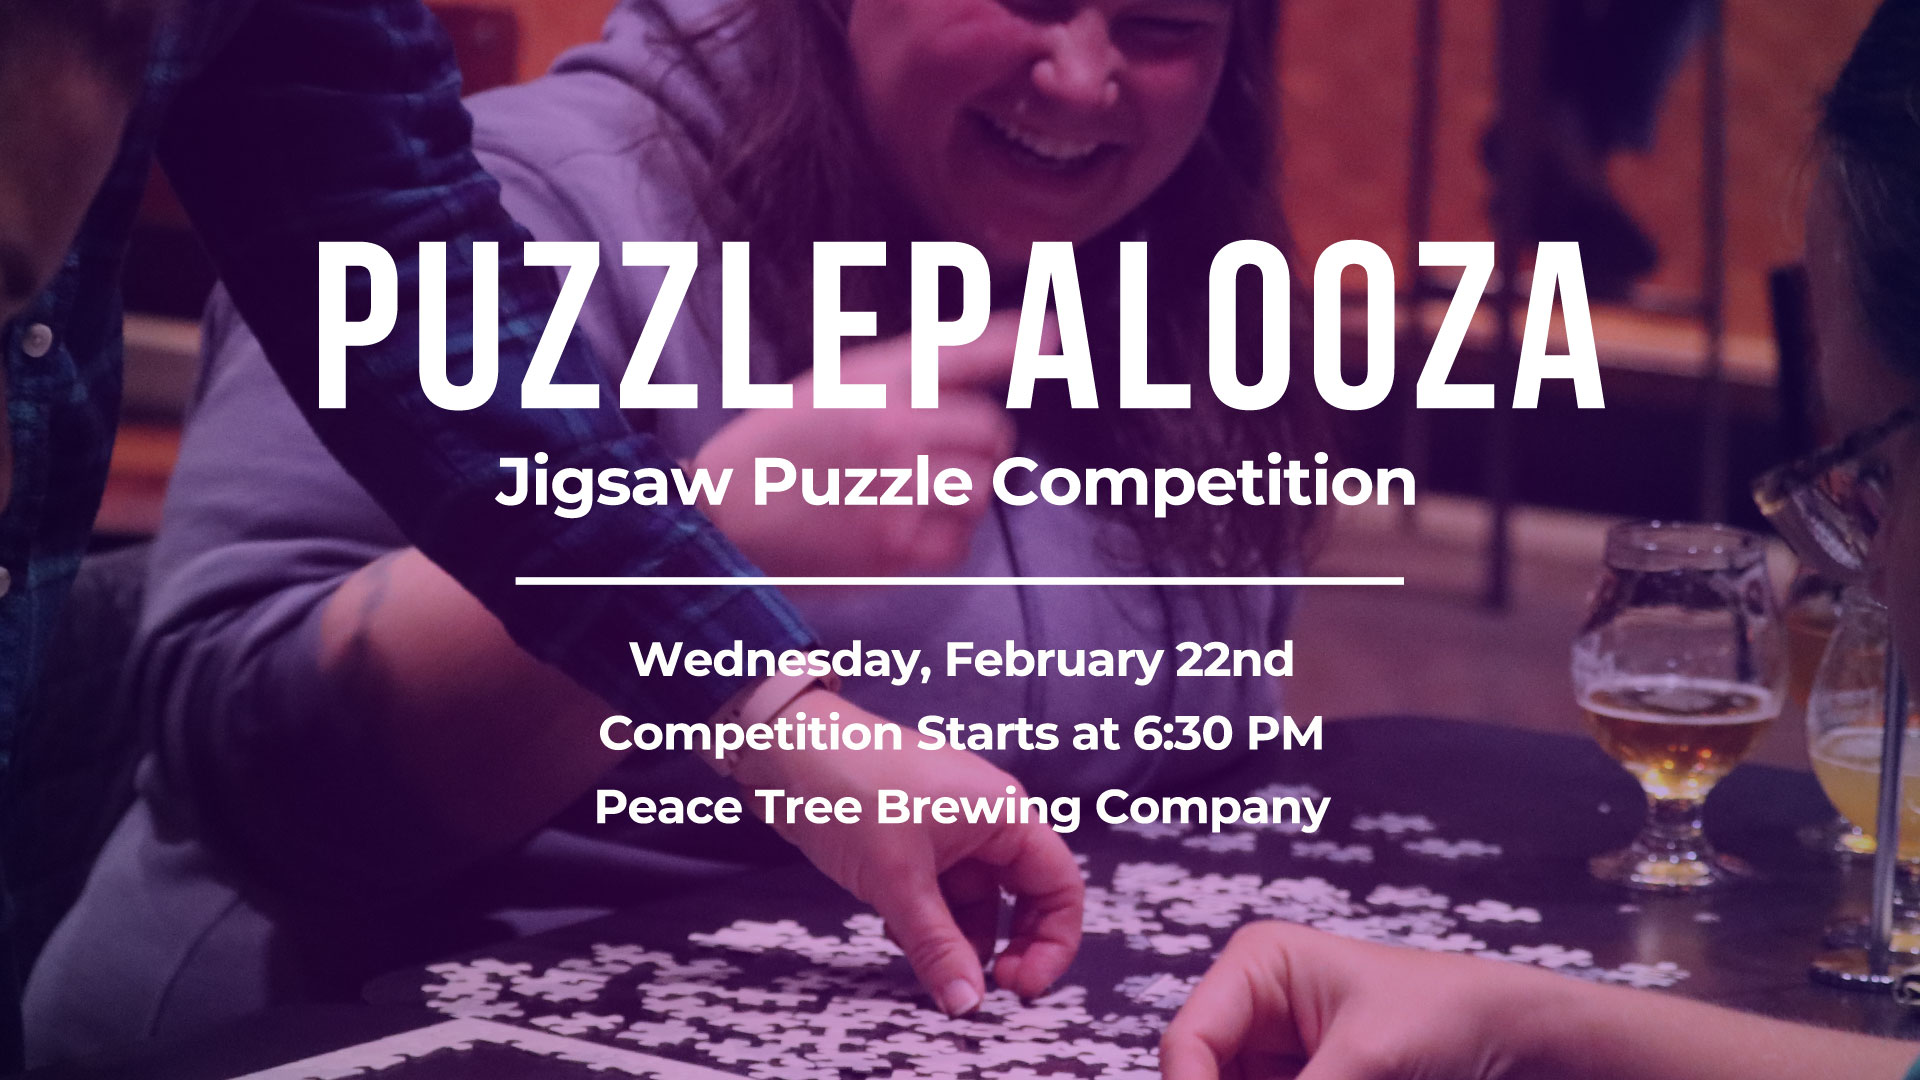 Puzzlepalooza Jigsaw Puzzle Competition Twisted Vine Des Moines February 22, 2023 Event Image